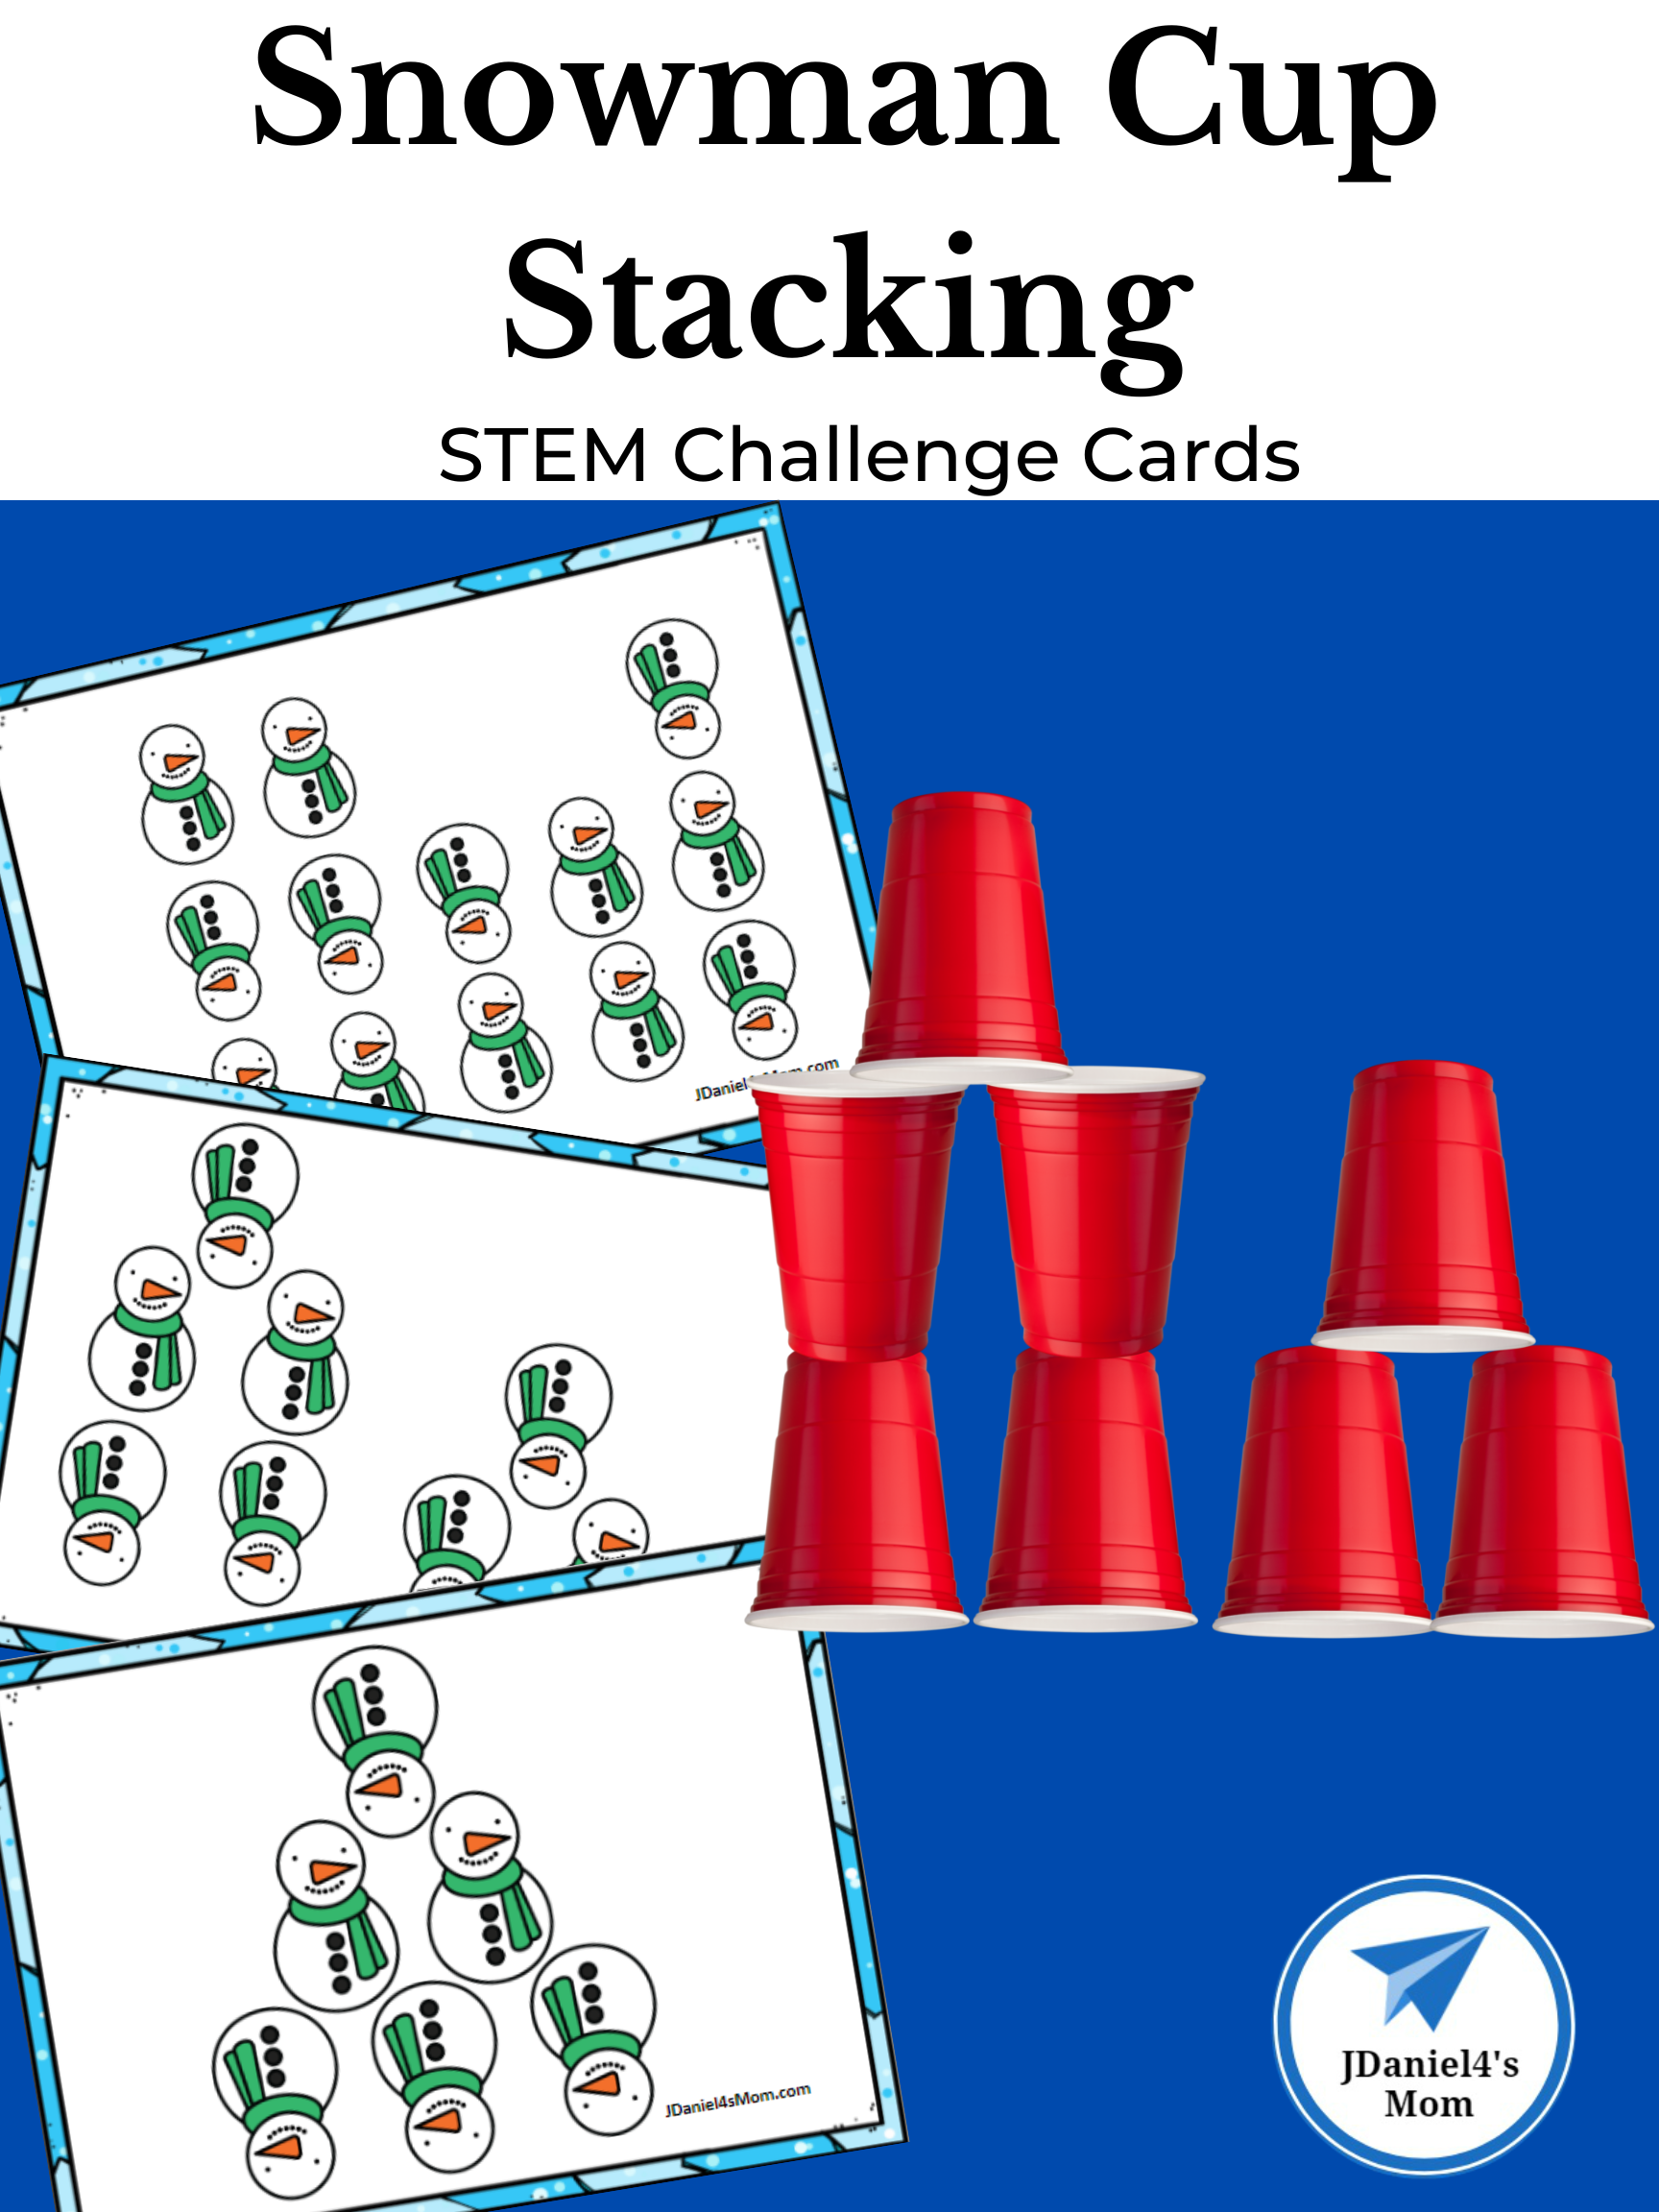 snowman-cup-stacking-stem-challenge-cards-jdaniel4s-mom